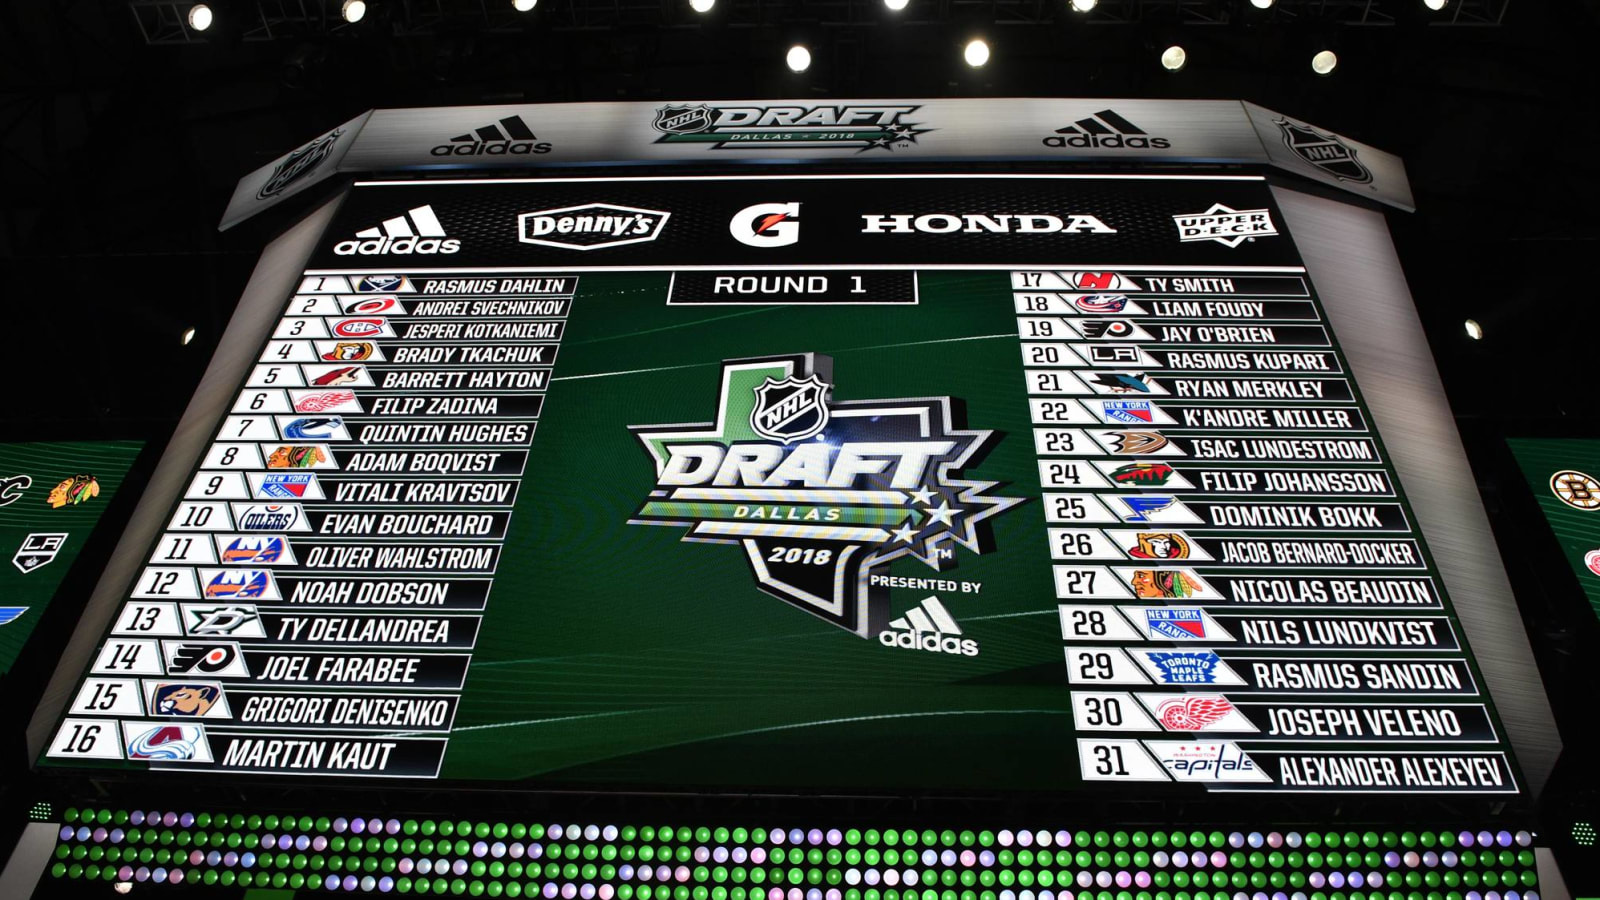 NHL considering changes to draft lottery system?